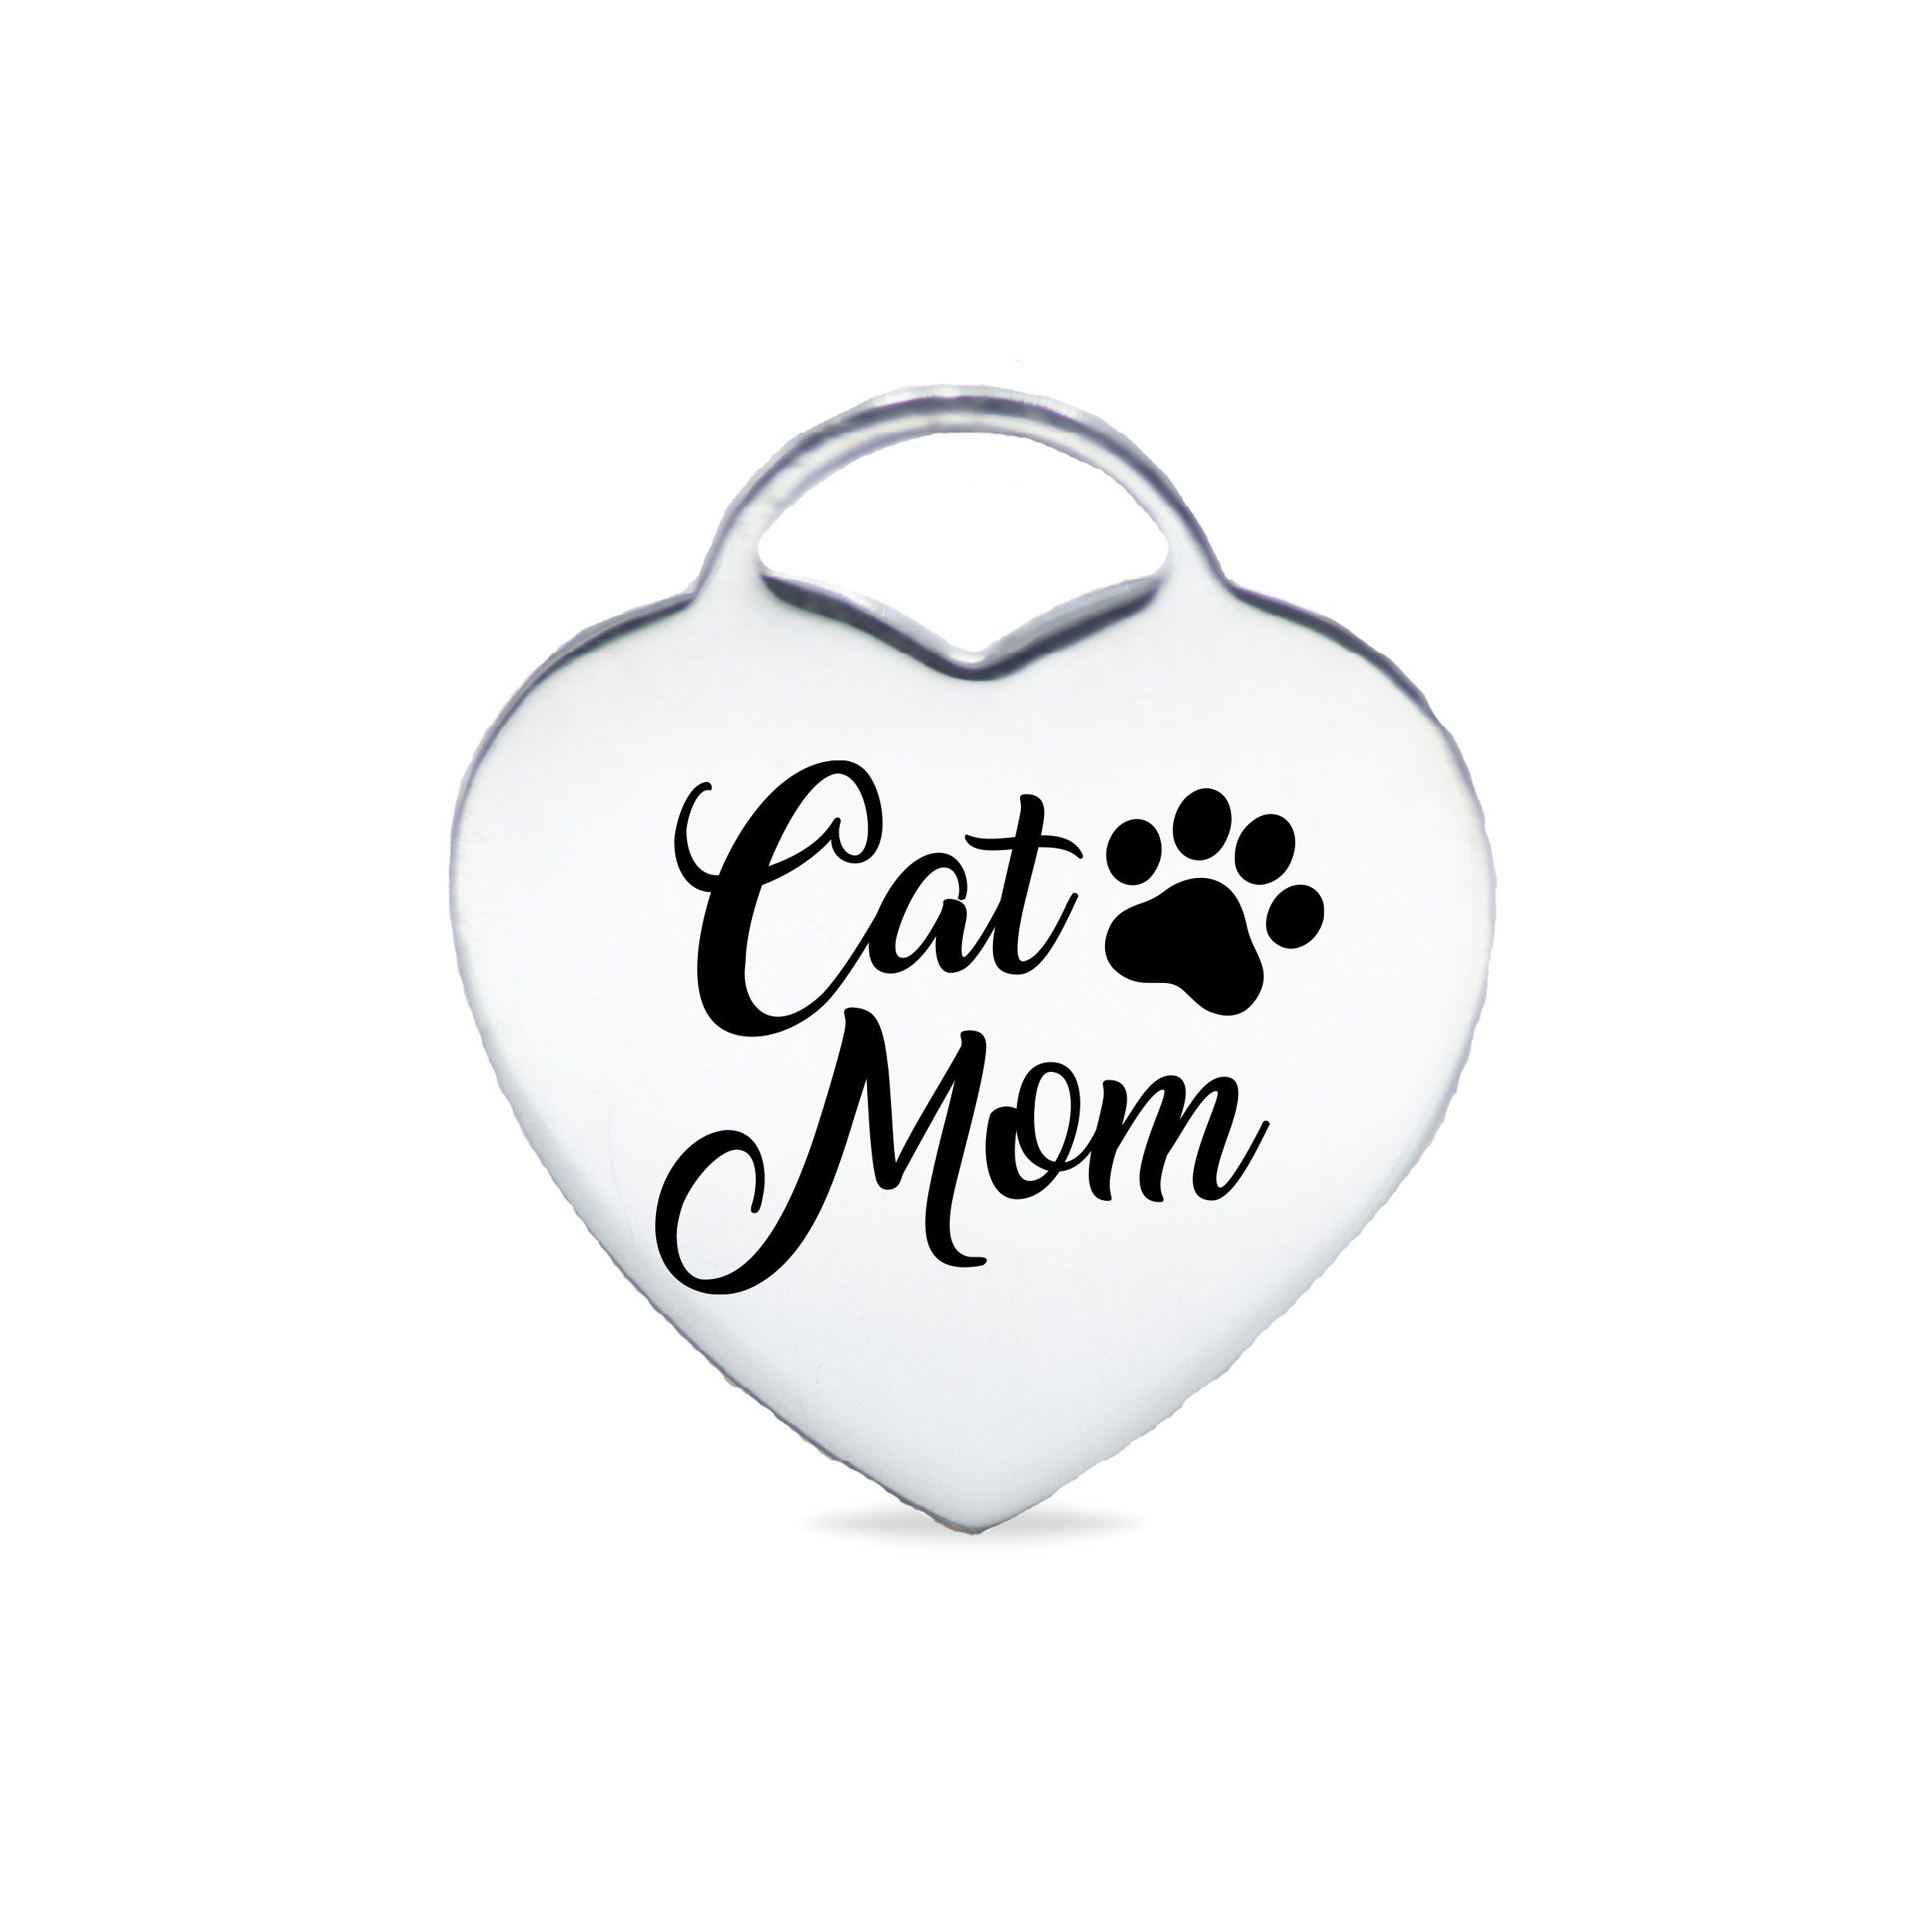 Cat Mom Silver Charm for your pet lover jewelry